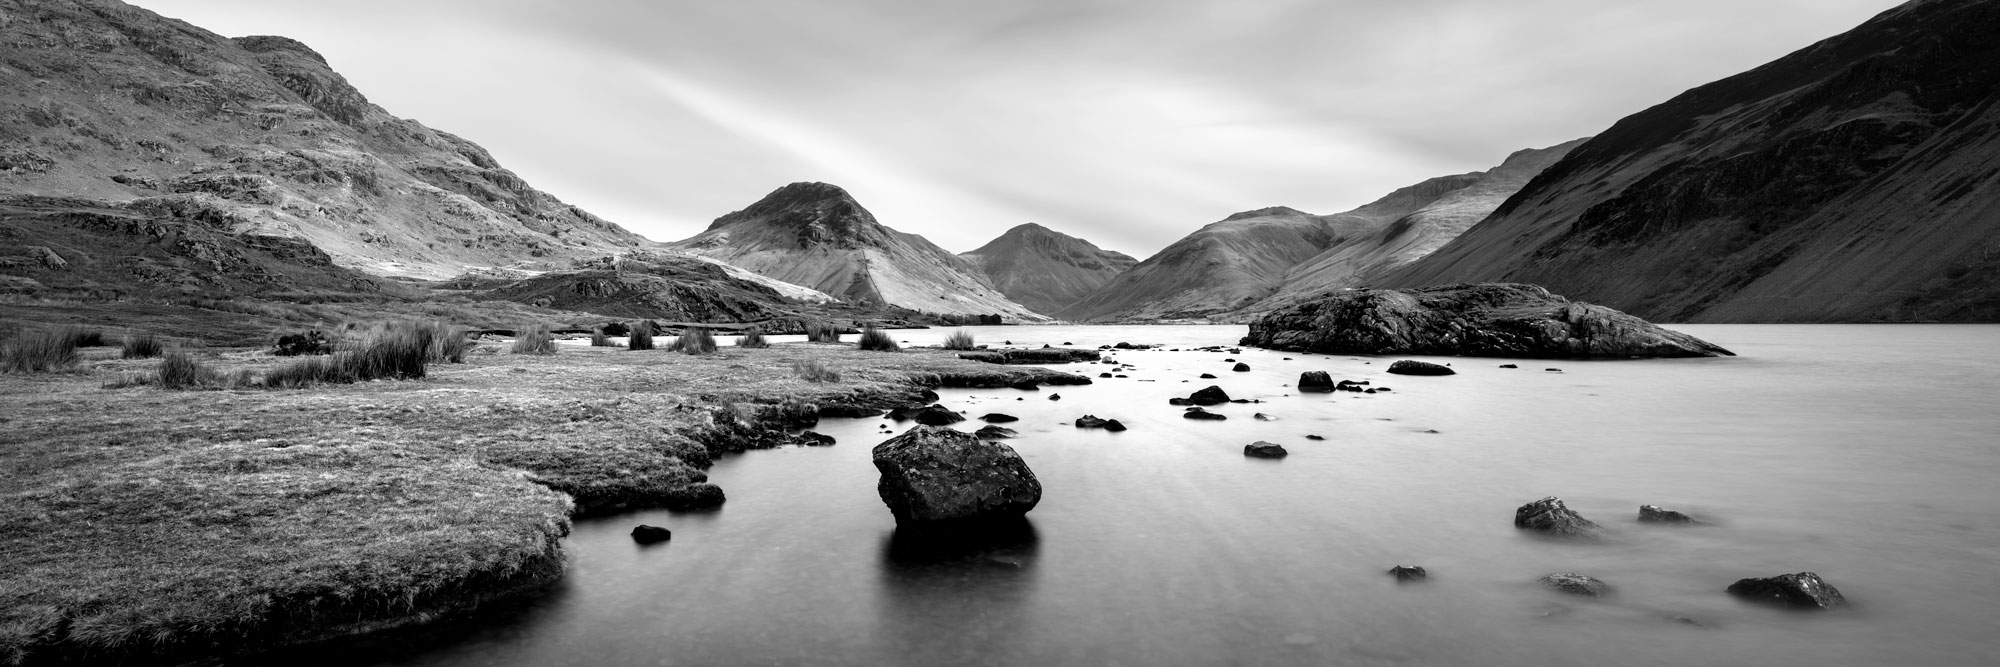 B&W Panorama of Wastwater Lake in Wasdale the Lake District